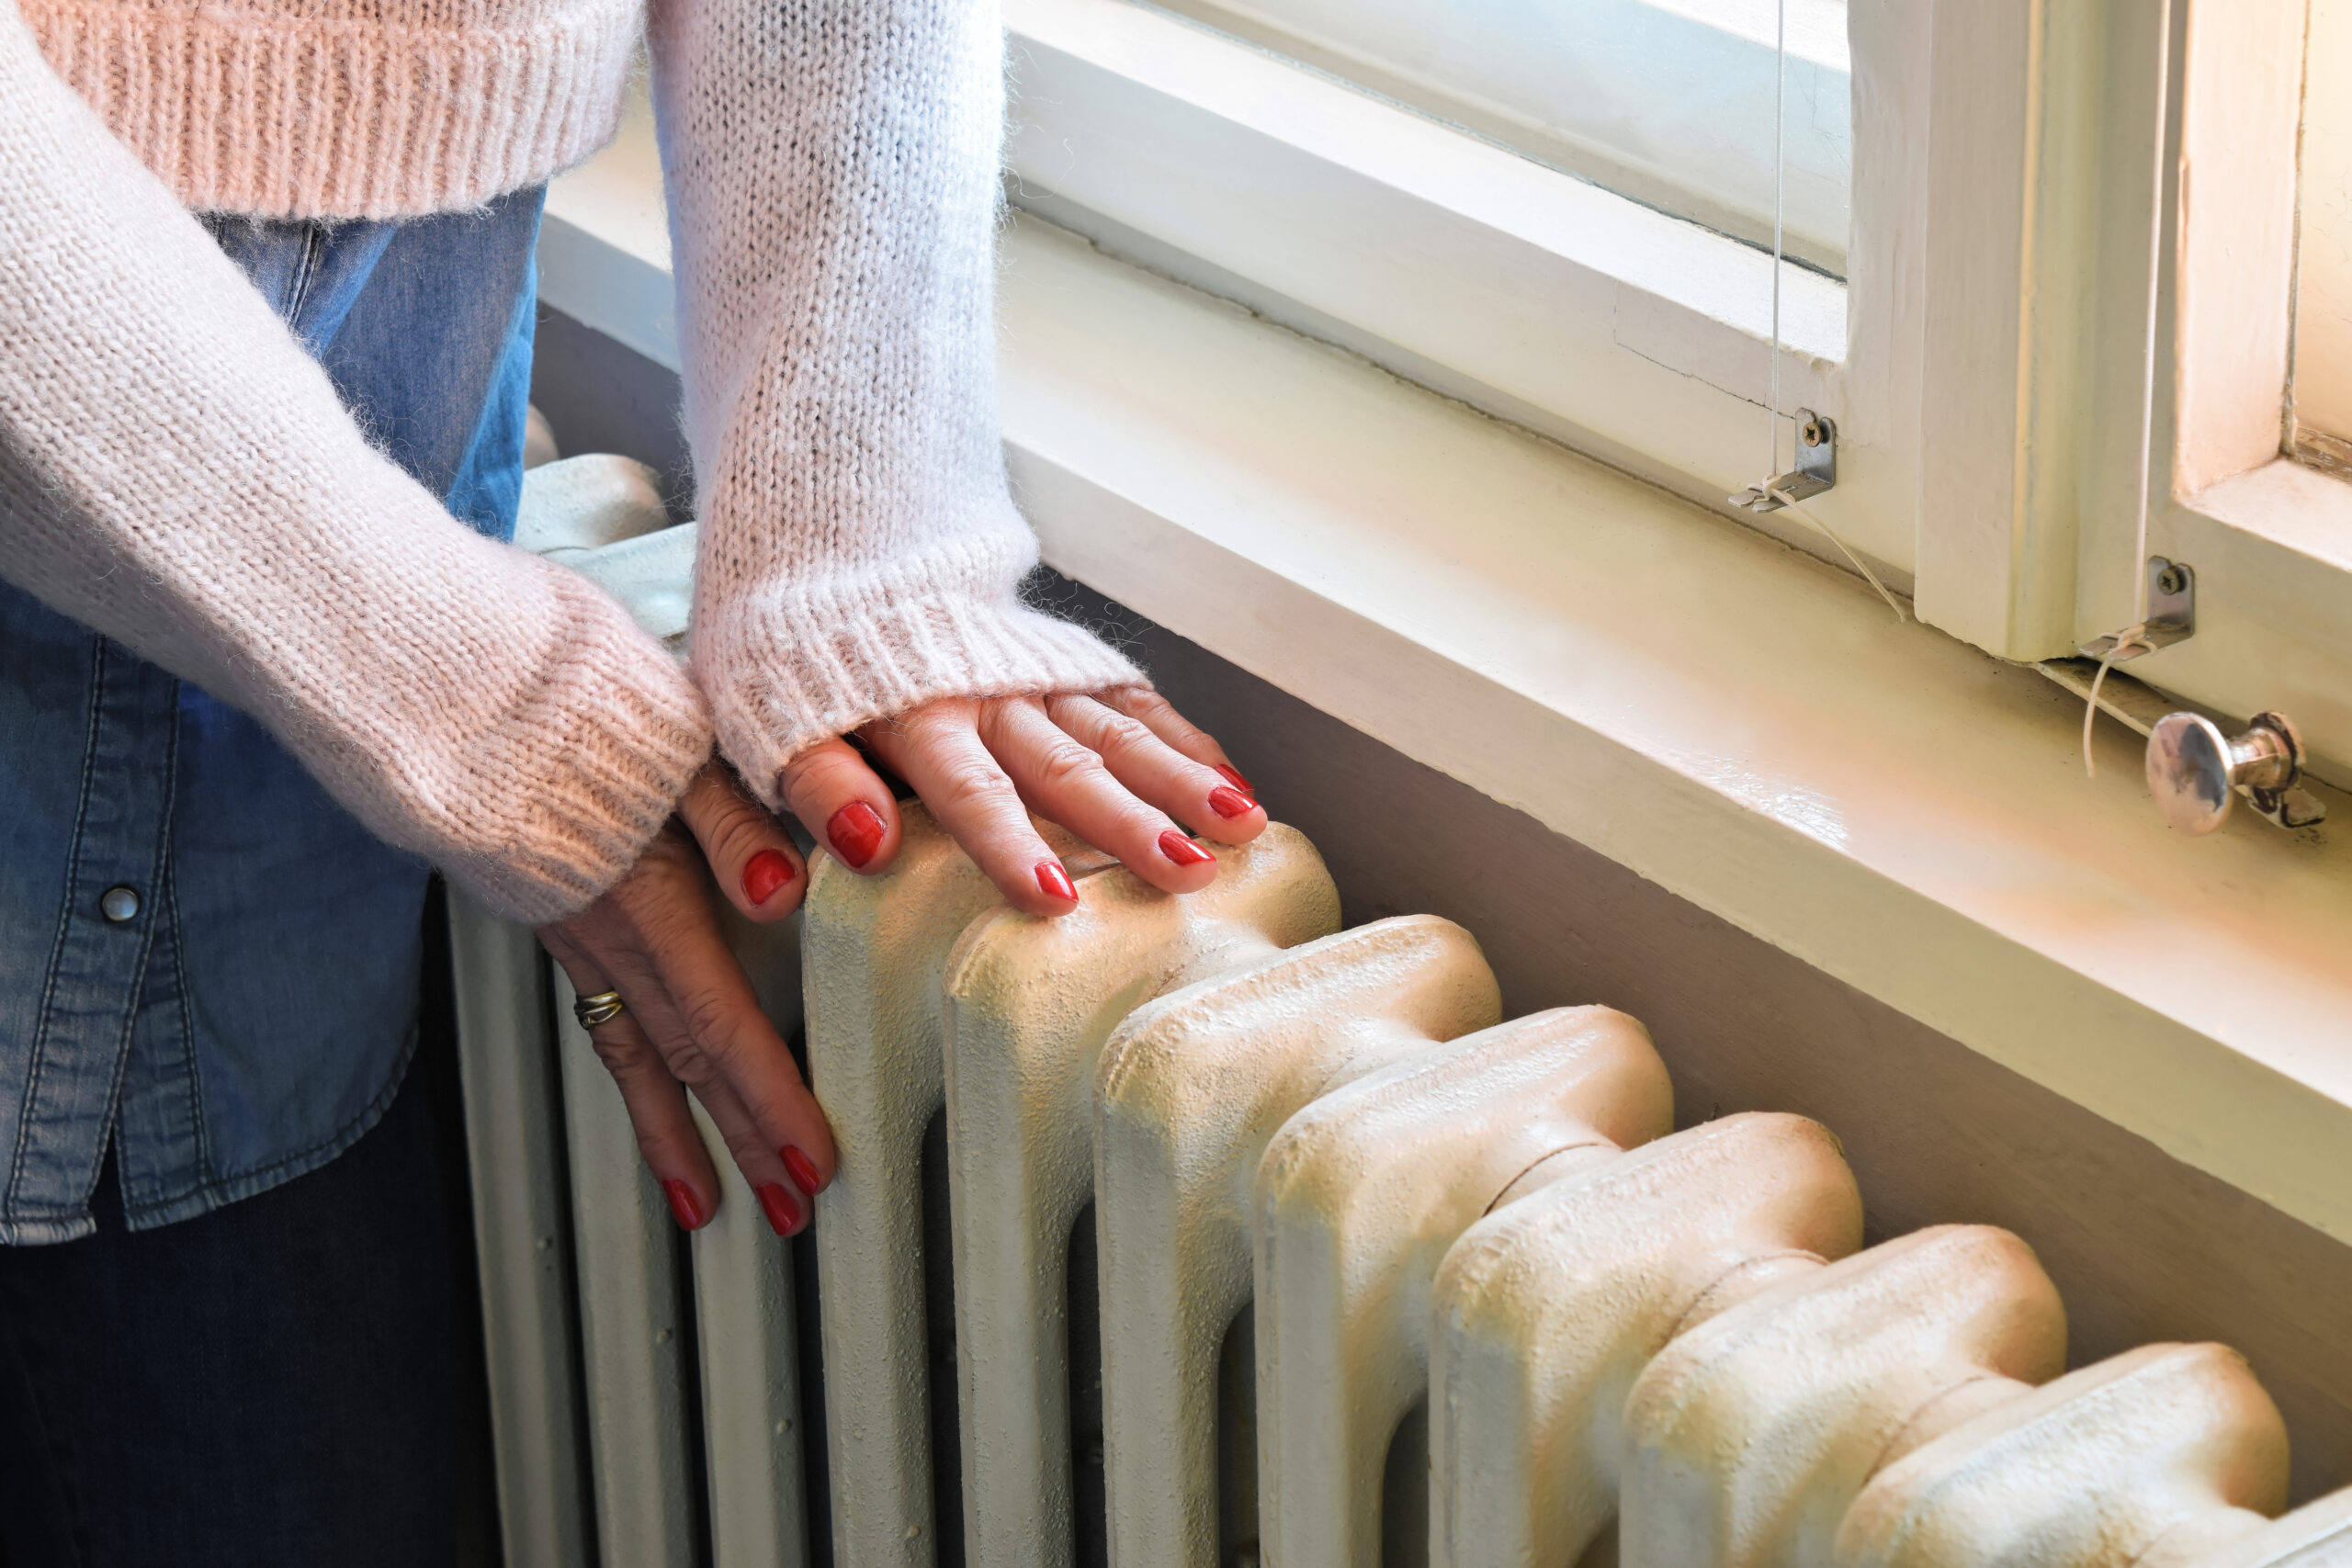 a woman with painted finger nails feeling the temperature of a radiator